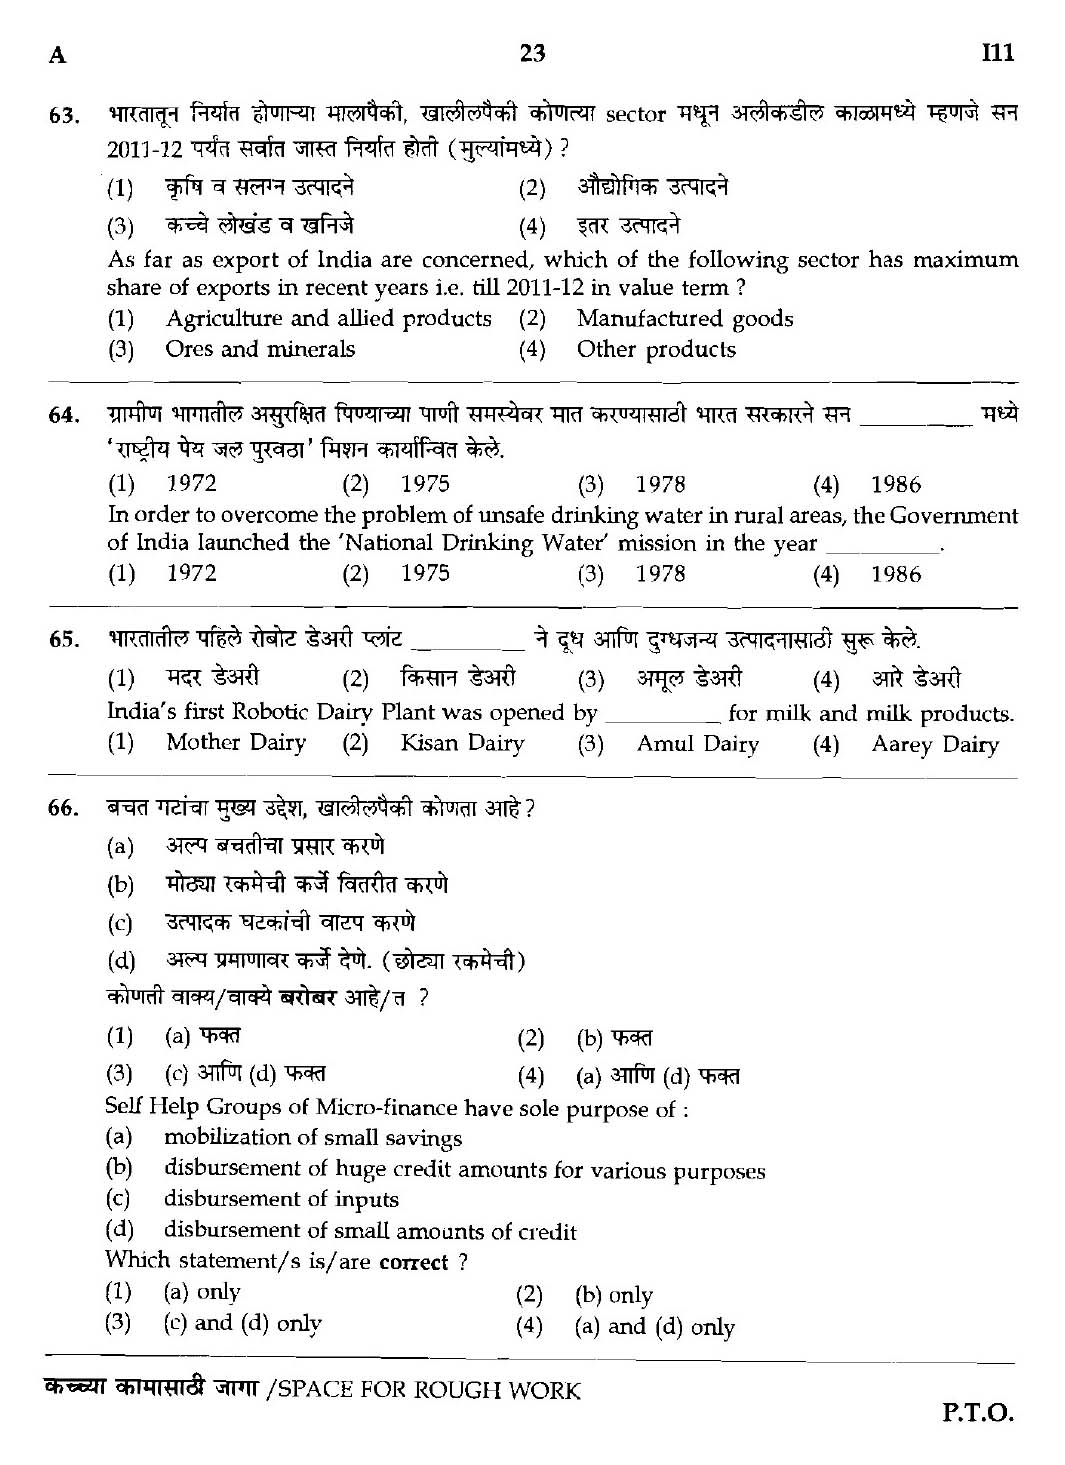 MPSC Agricultural Services Preliminary Exam 2018 Question Paper 22